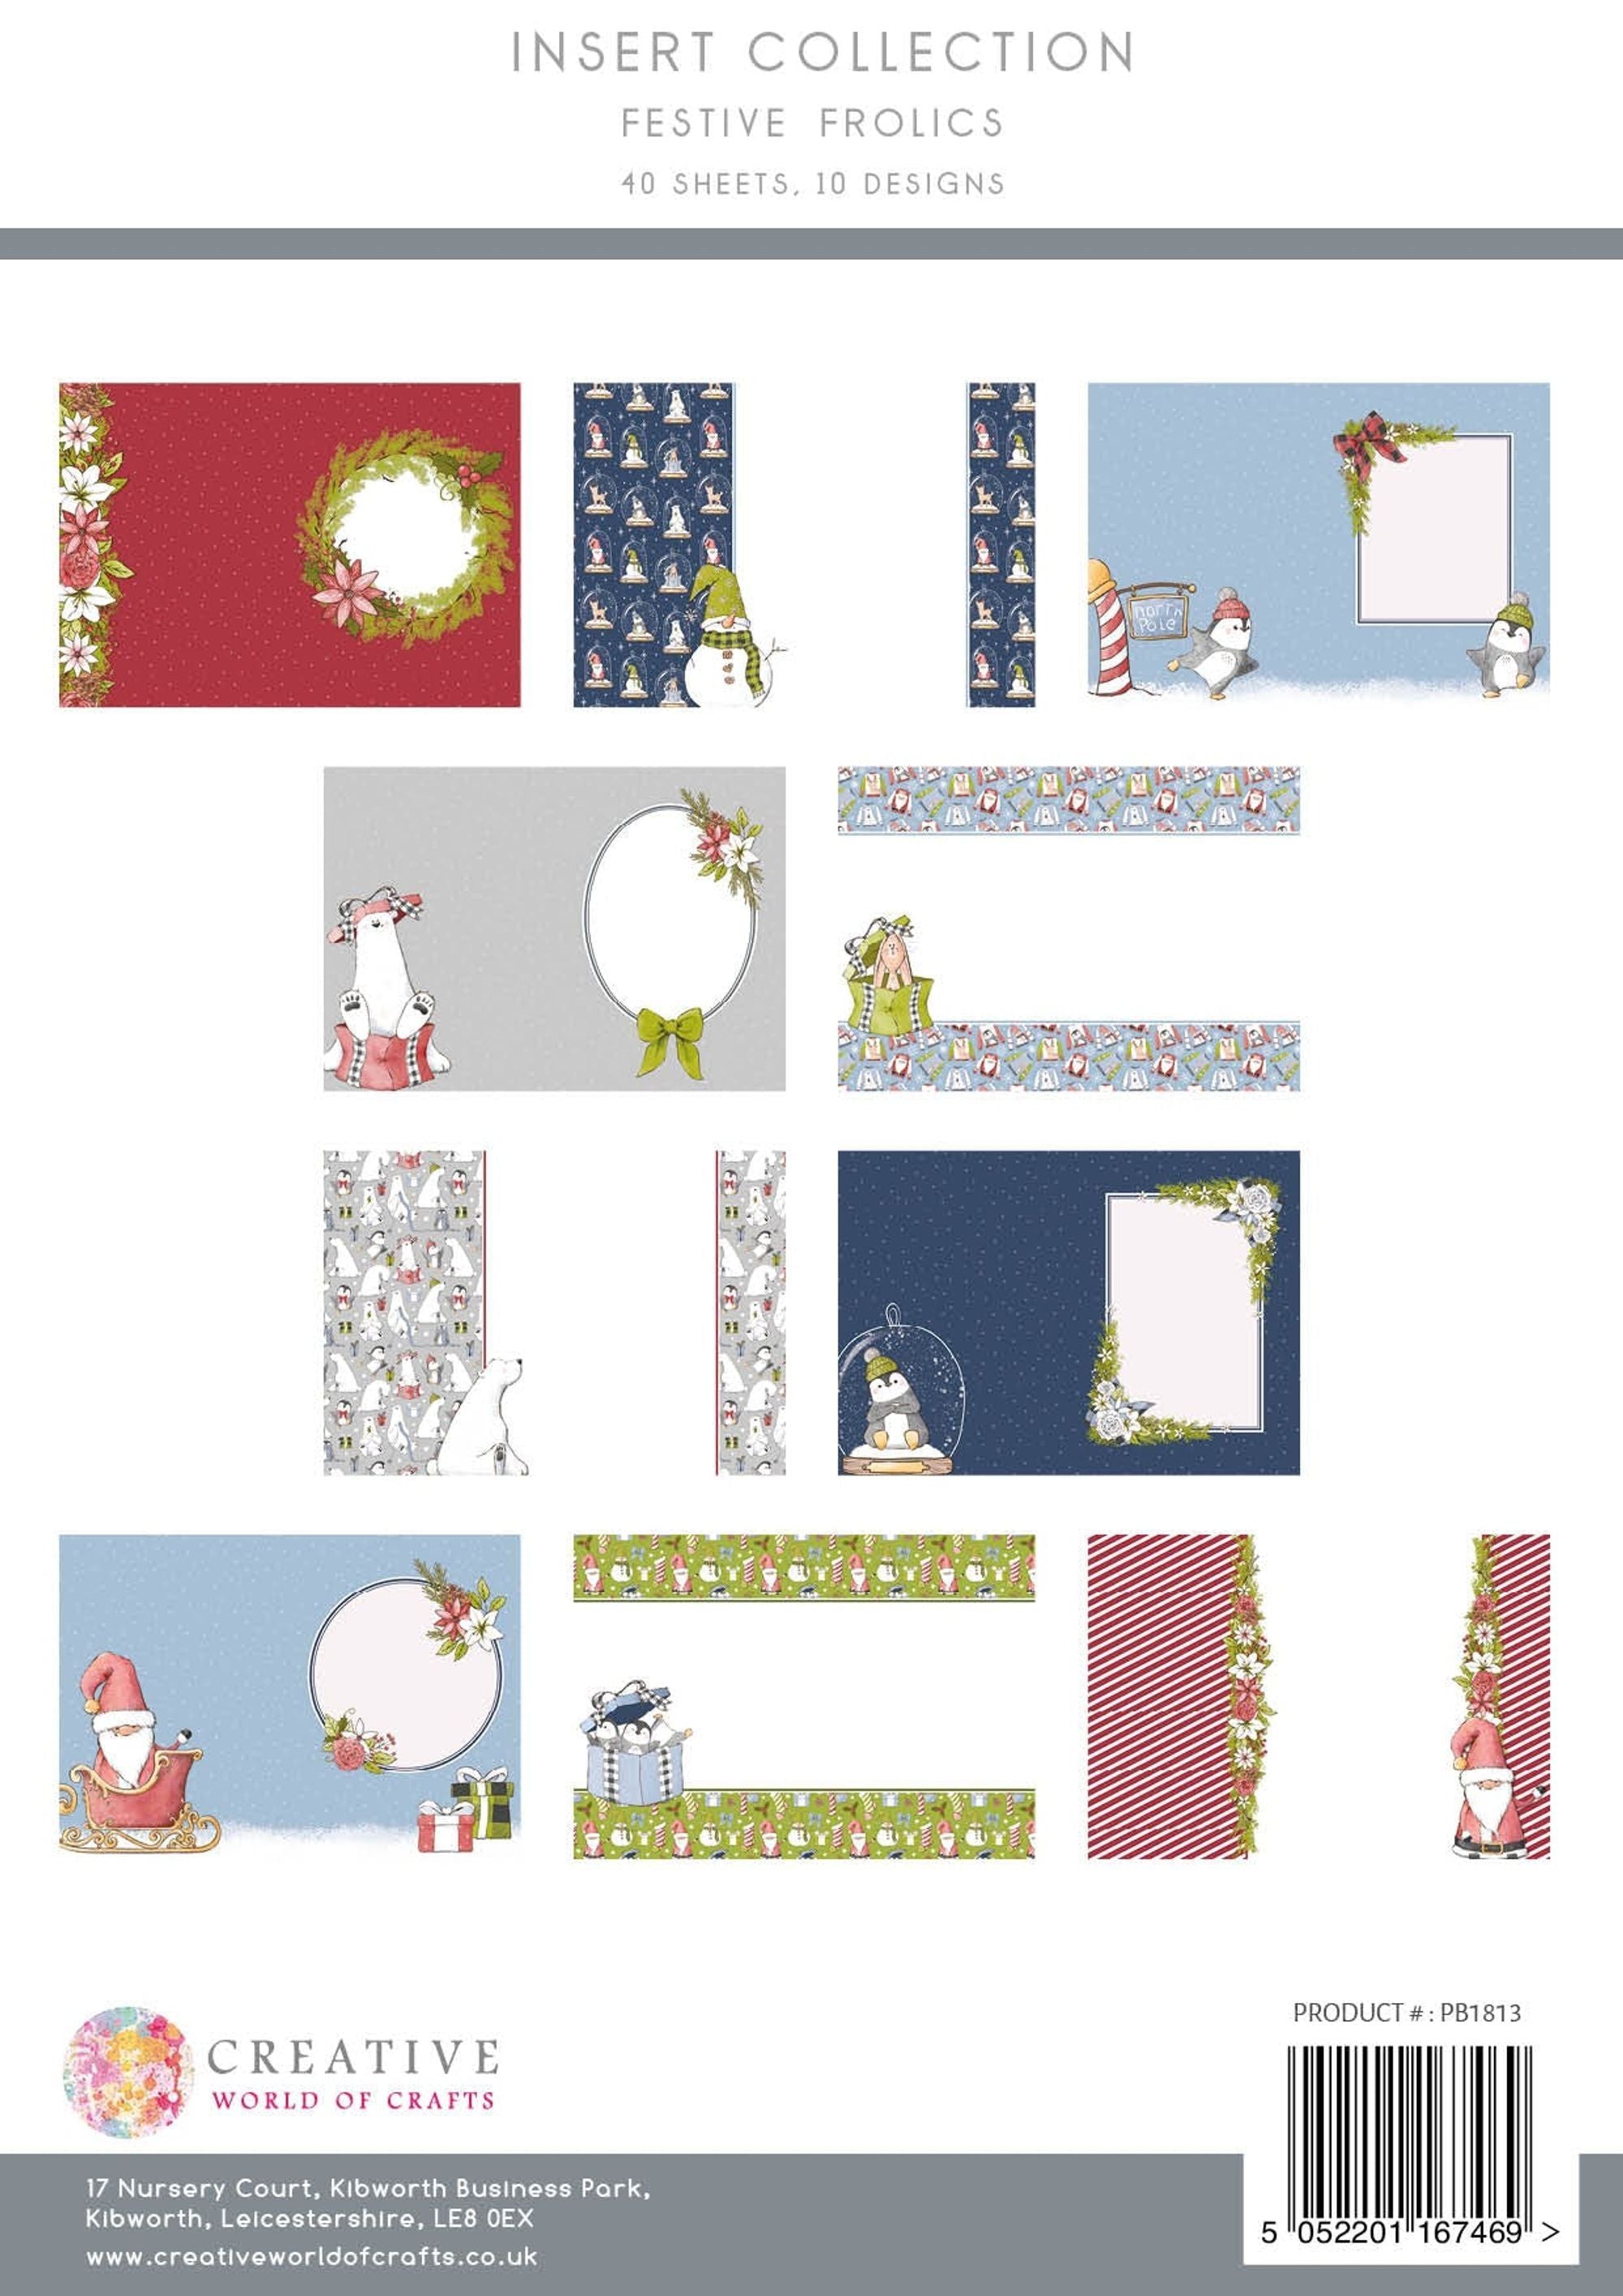 The Paper Boutique Festive Frolics Insert Collection